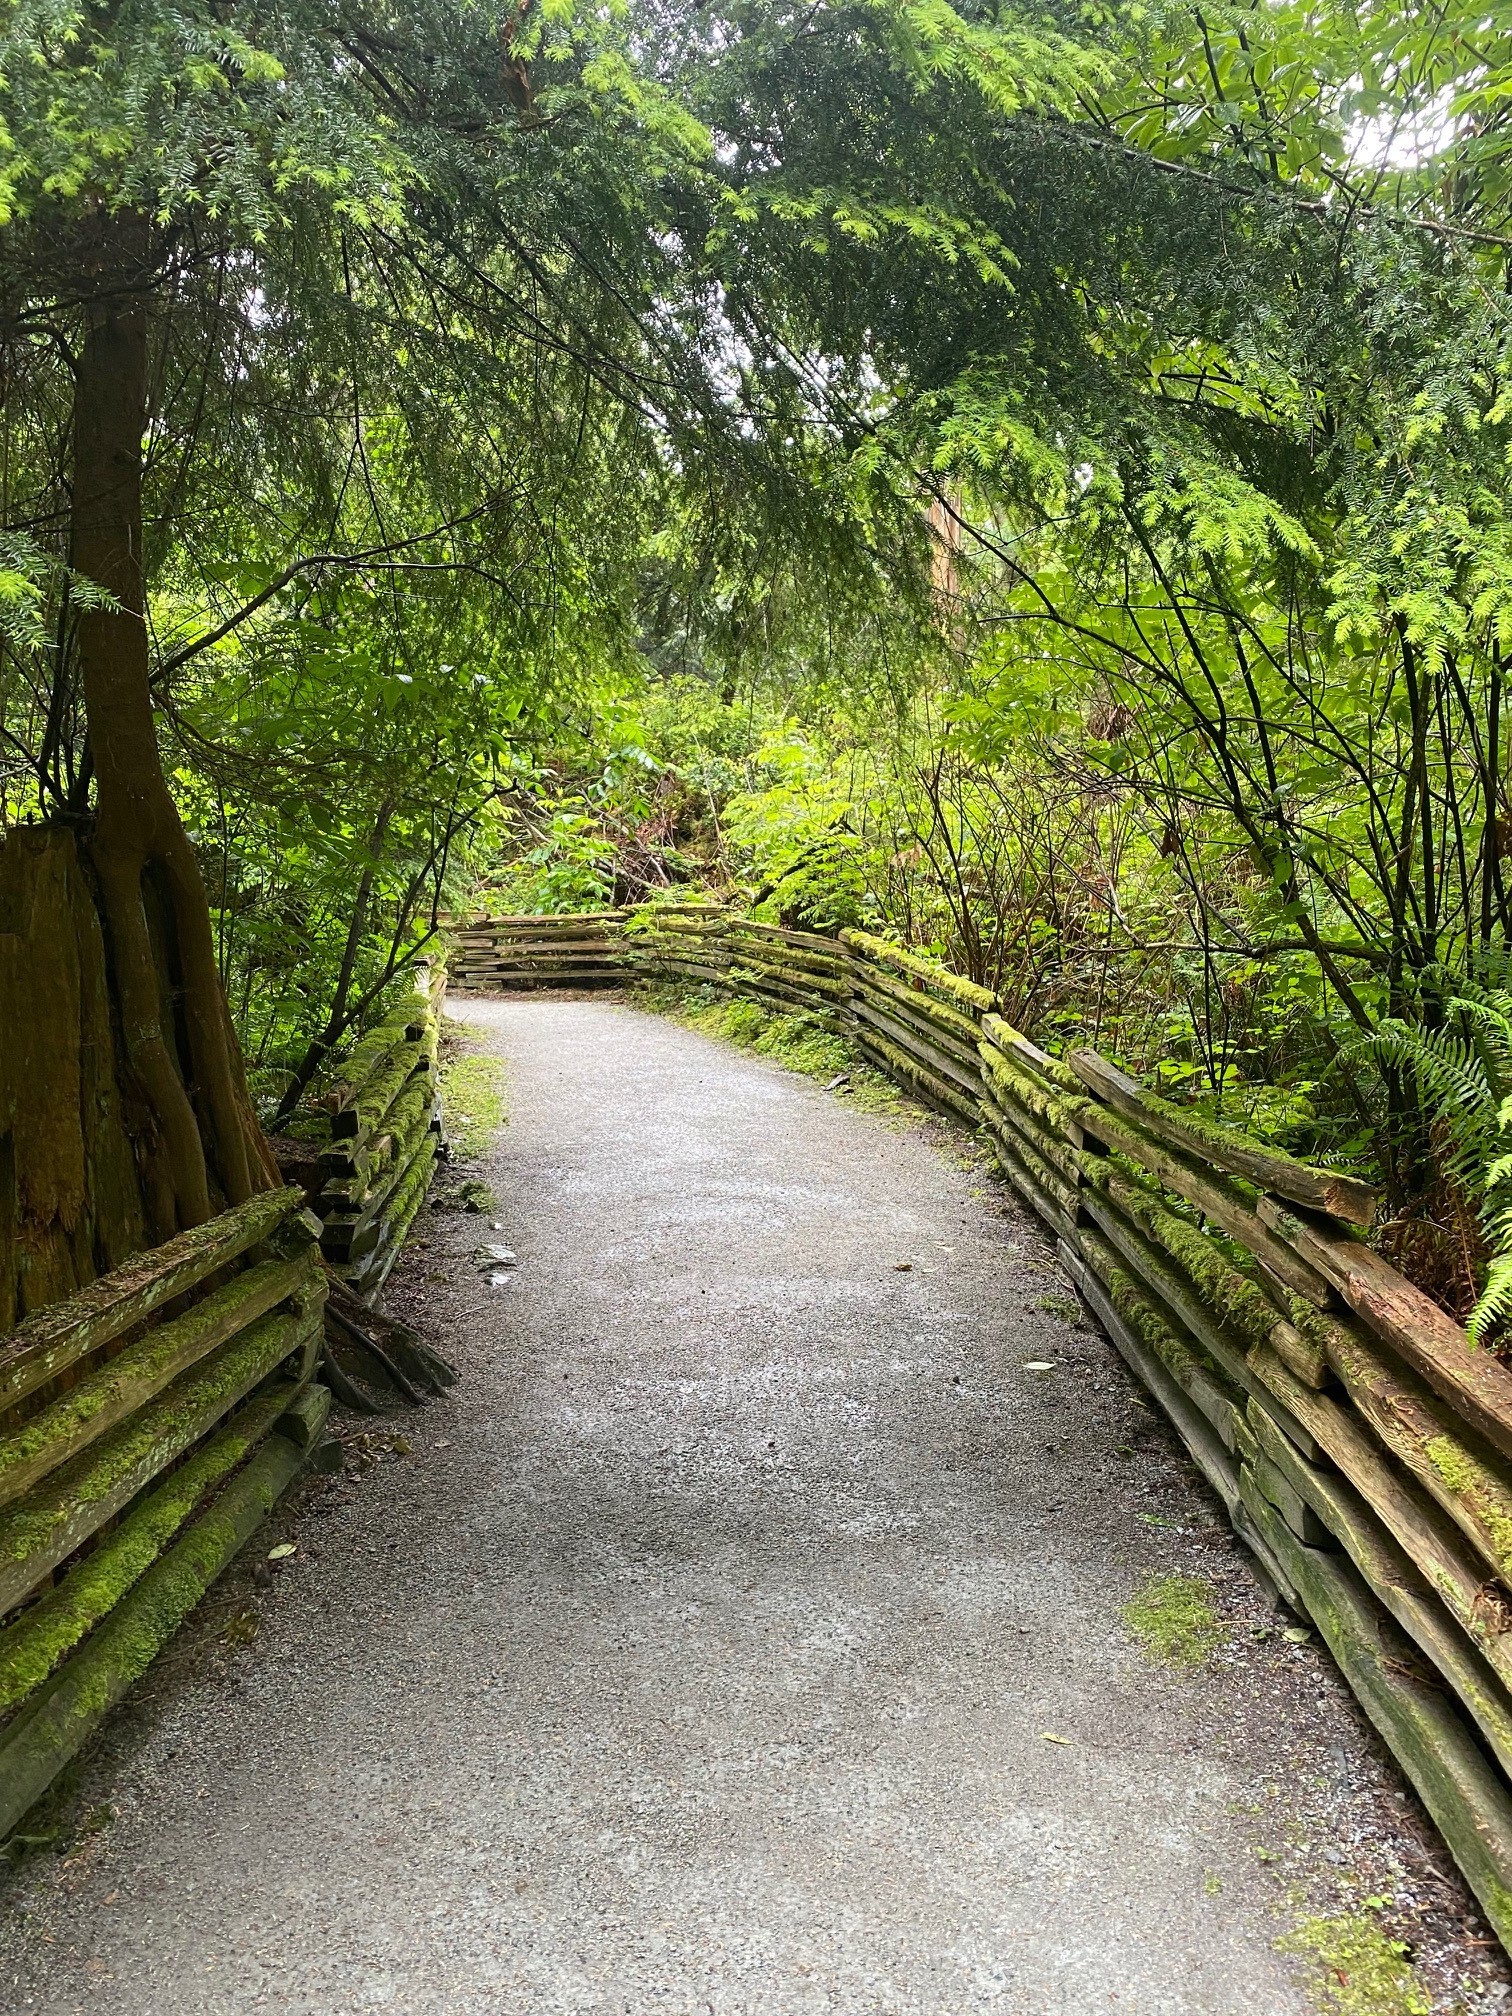 Paved accessible trail in a rainforest park. There is a wooden fence along both sides of the trail.